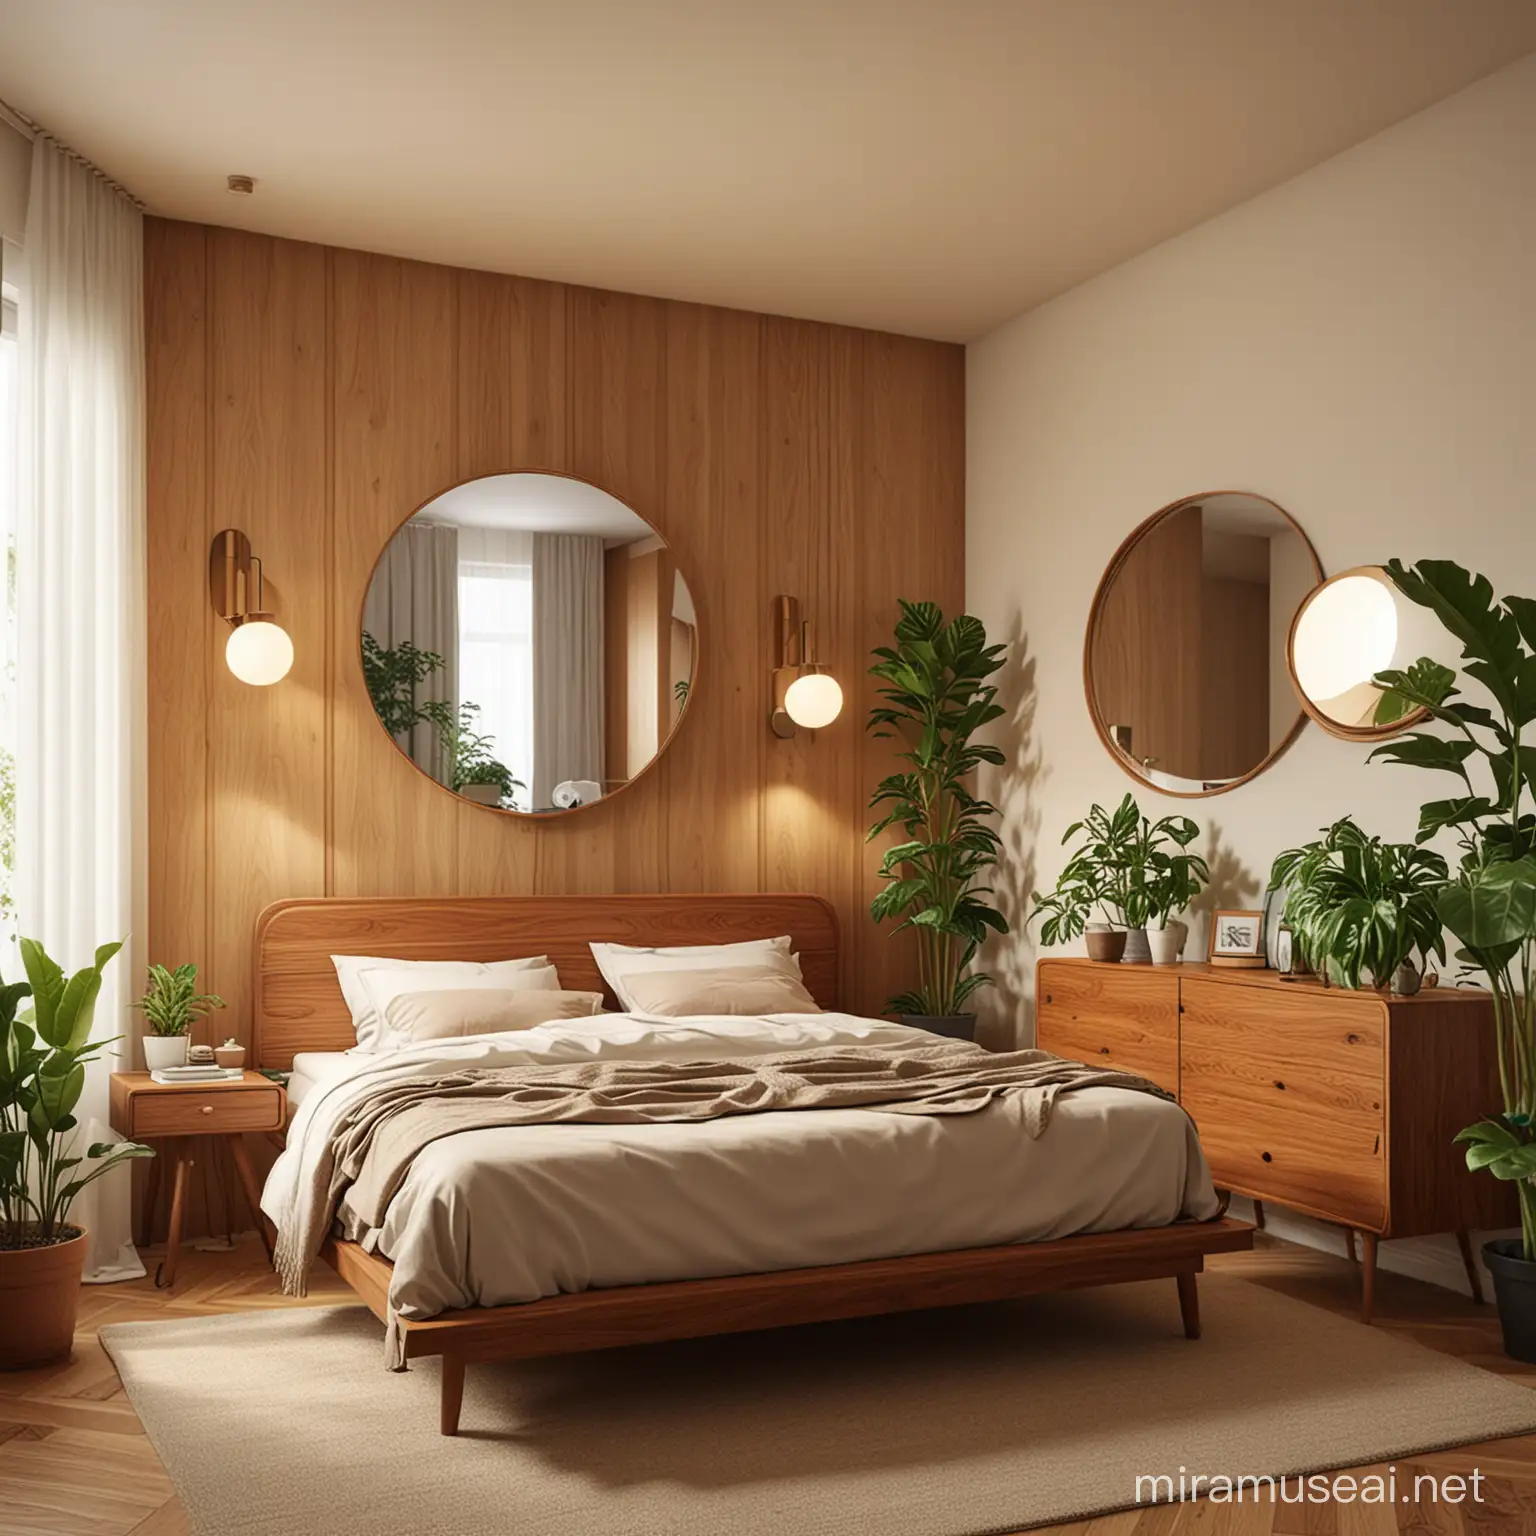 MidCentury Style Bedroom with Wooden Dcor and Curved Mirror